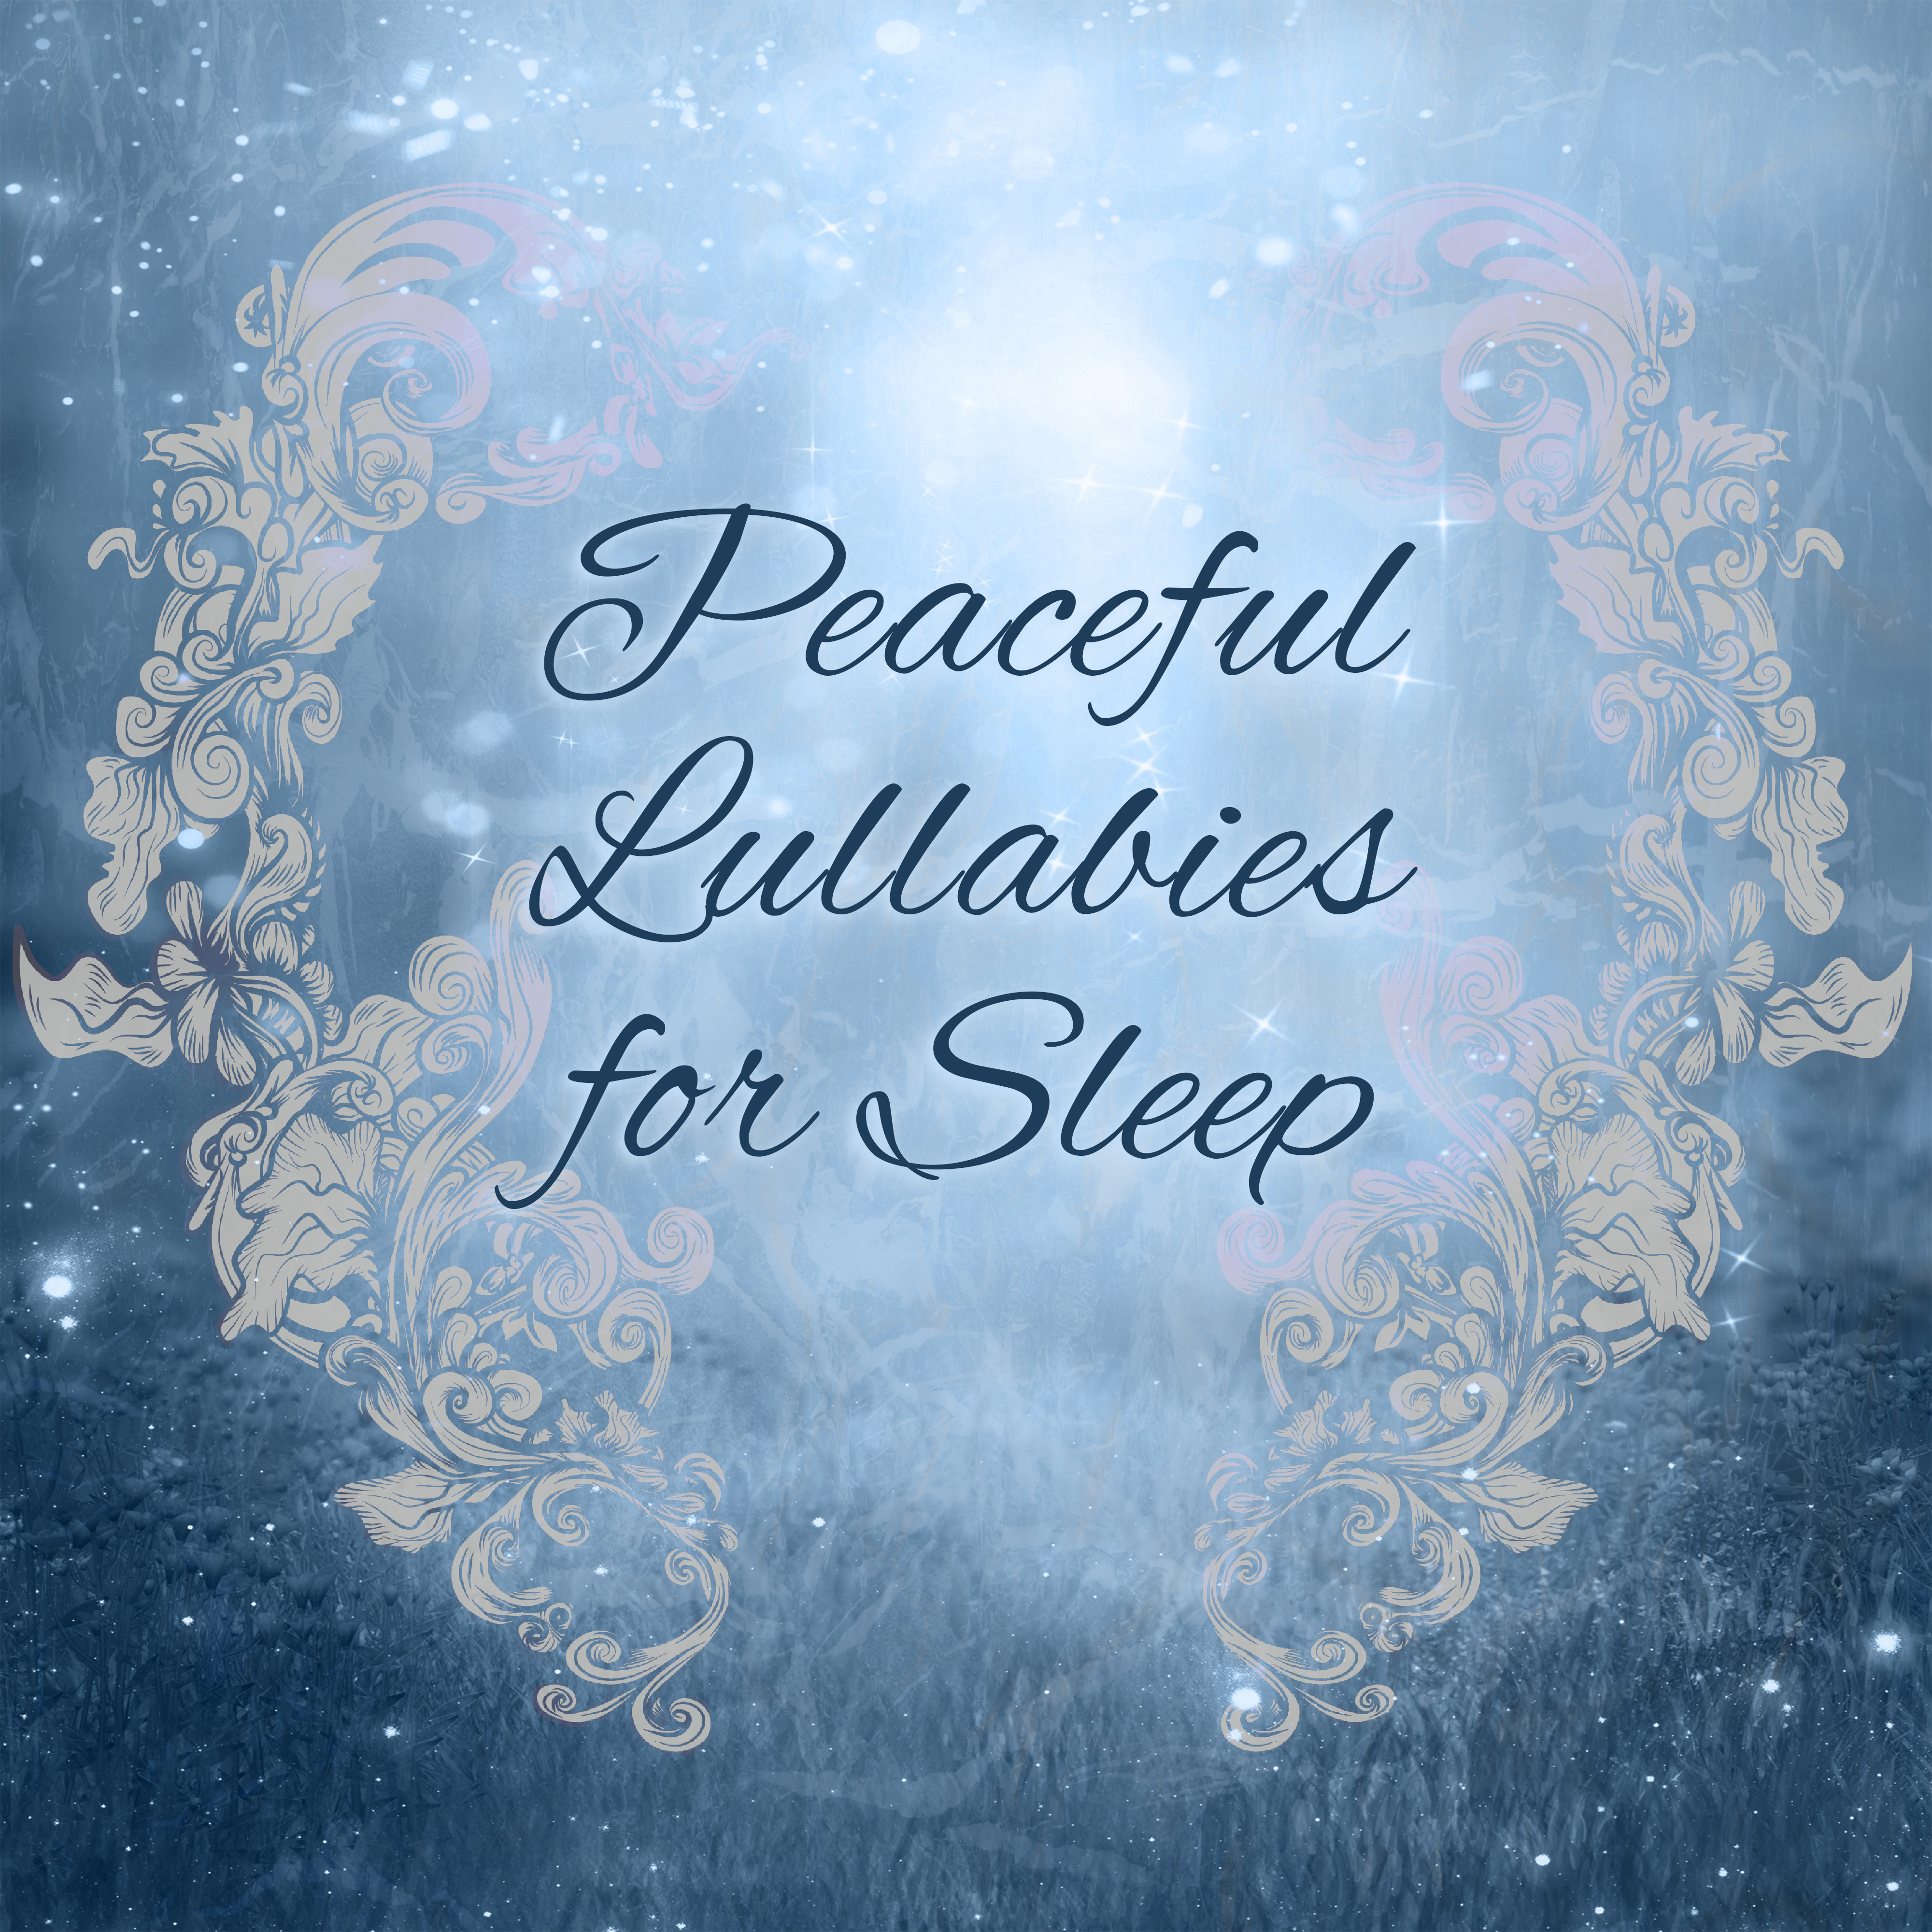 Peaceful Lullabies for Sleep  Soft Music at Goodnight, Relaxing Music, Restful Sleep, Bedtime, Nature Sounds, Sweet Dreams, Deep Relief